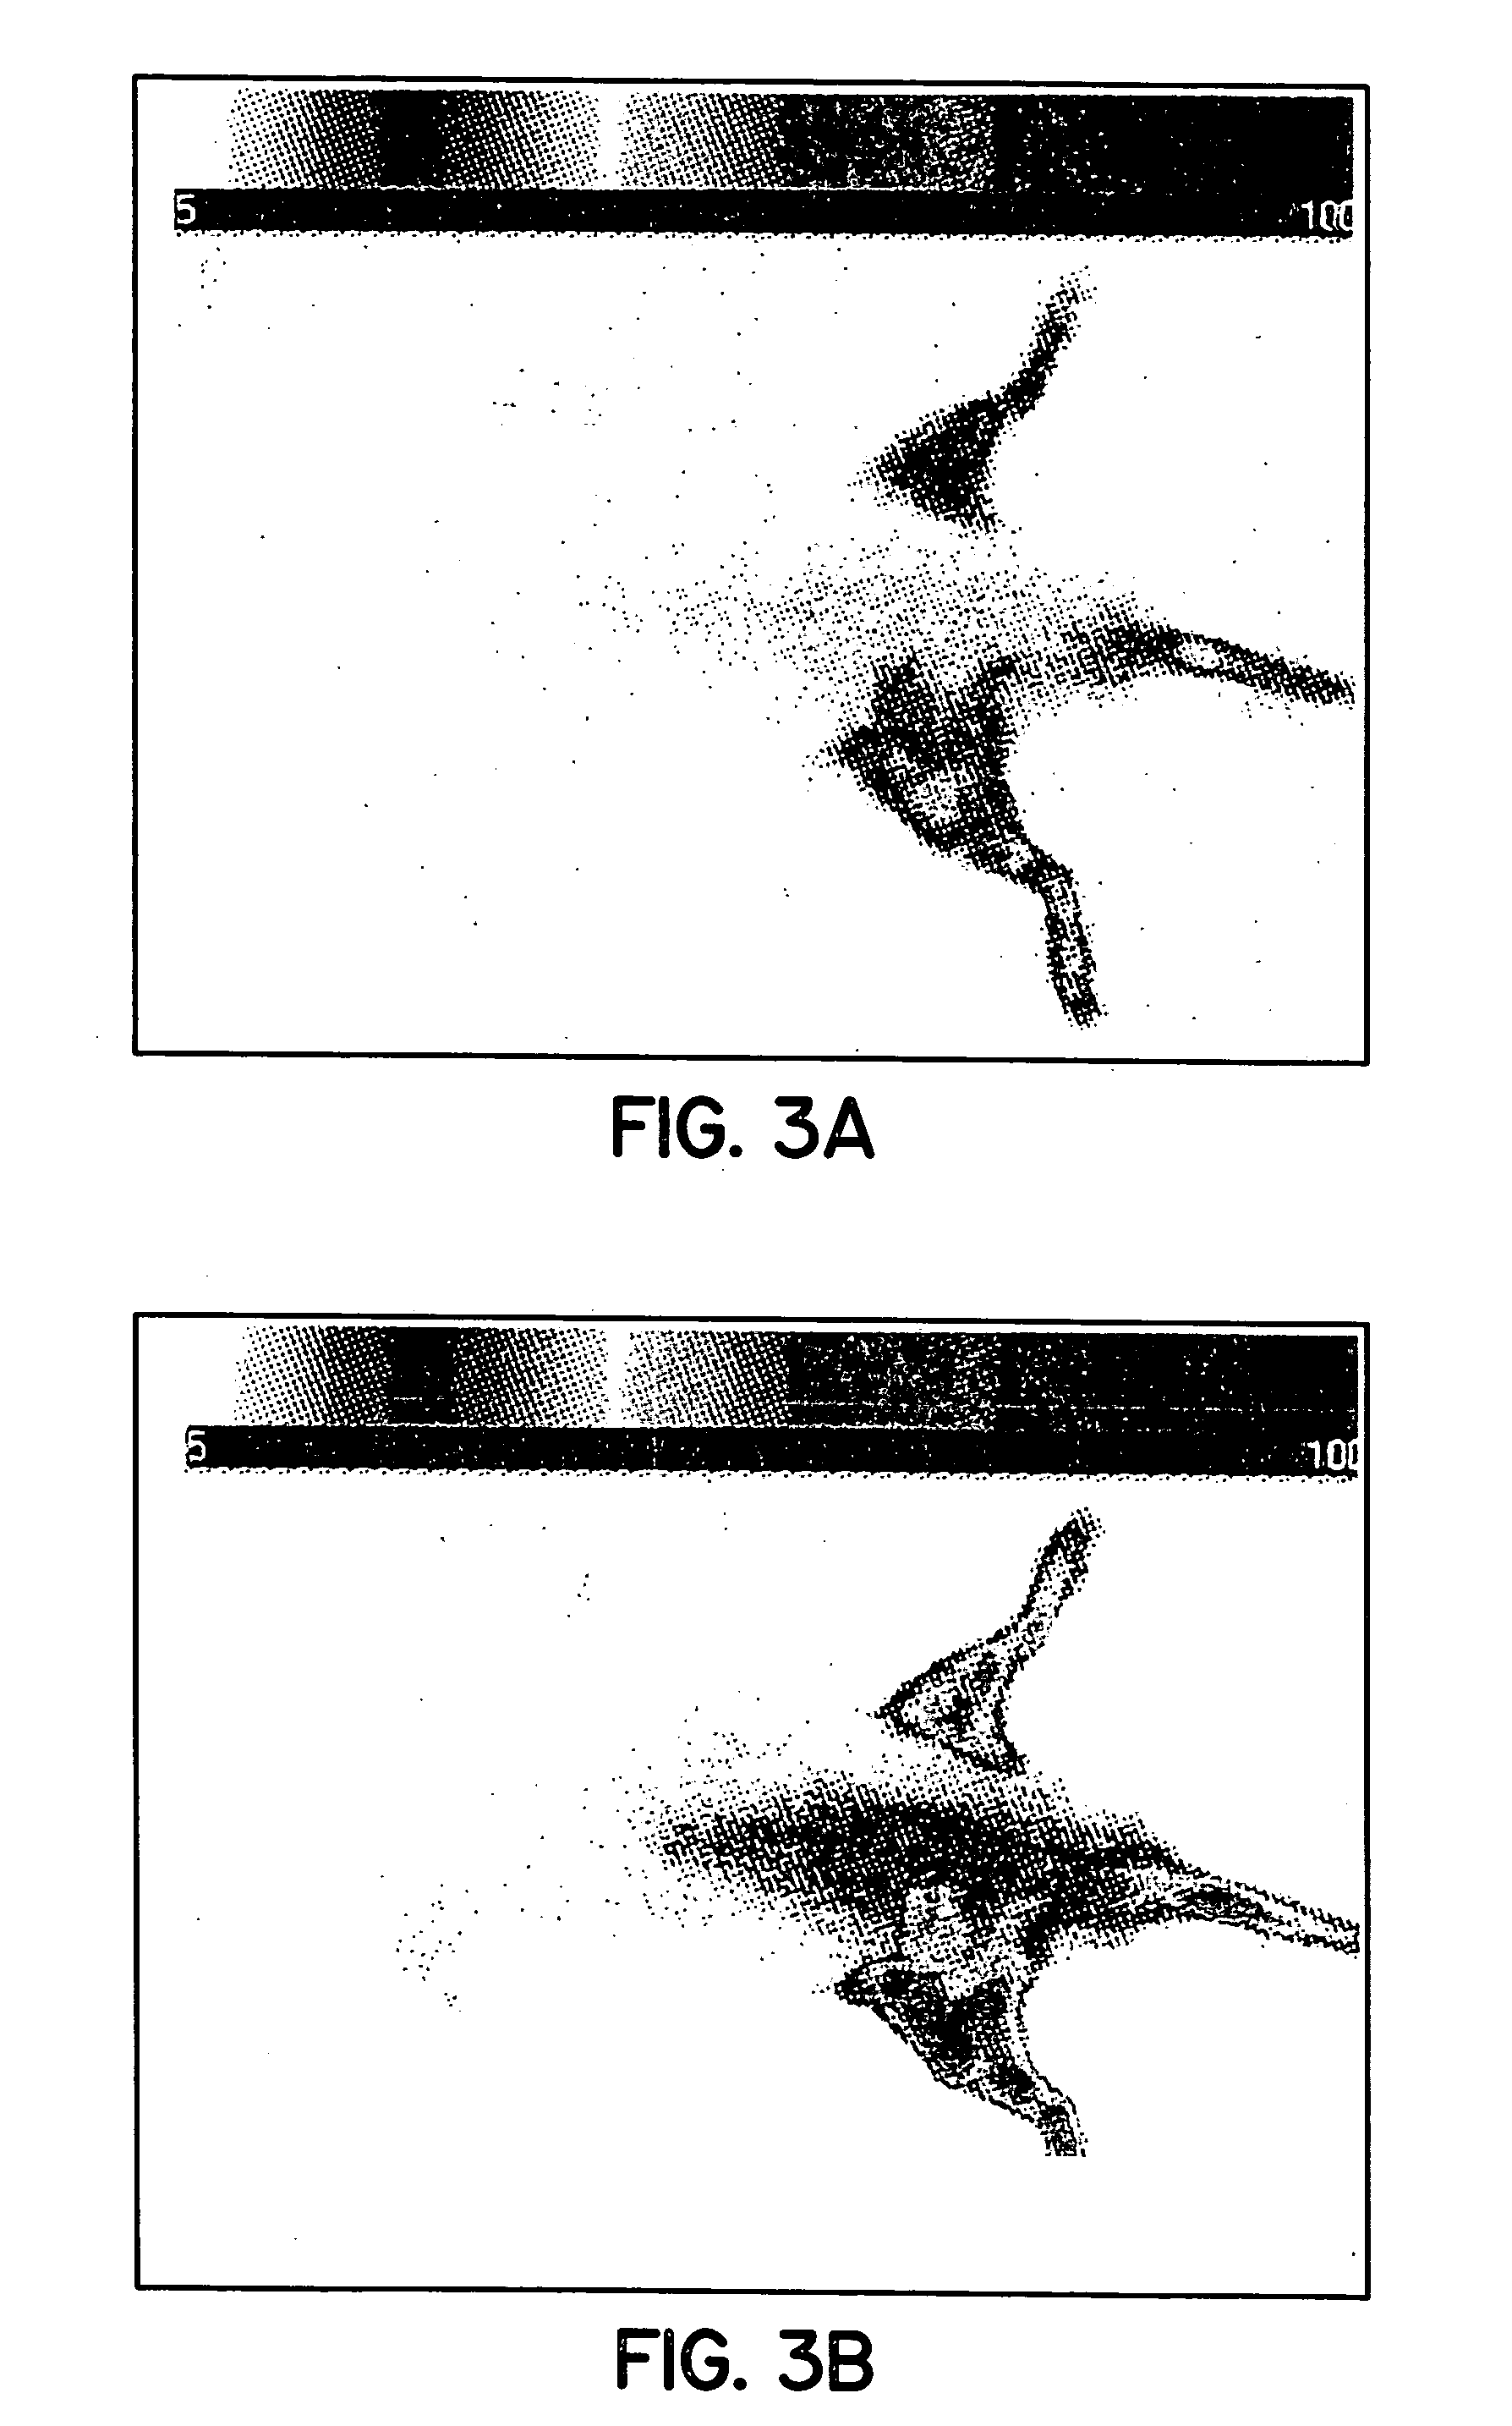 Pathological tissue detection and treatment employing targeted optical agents